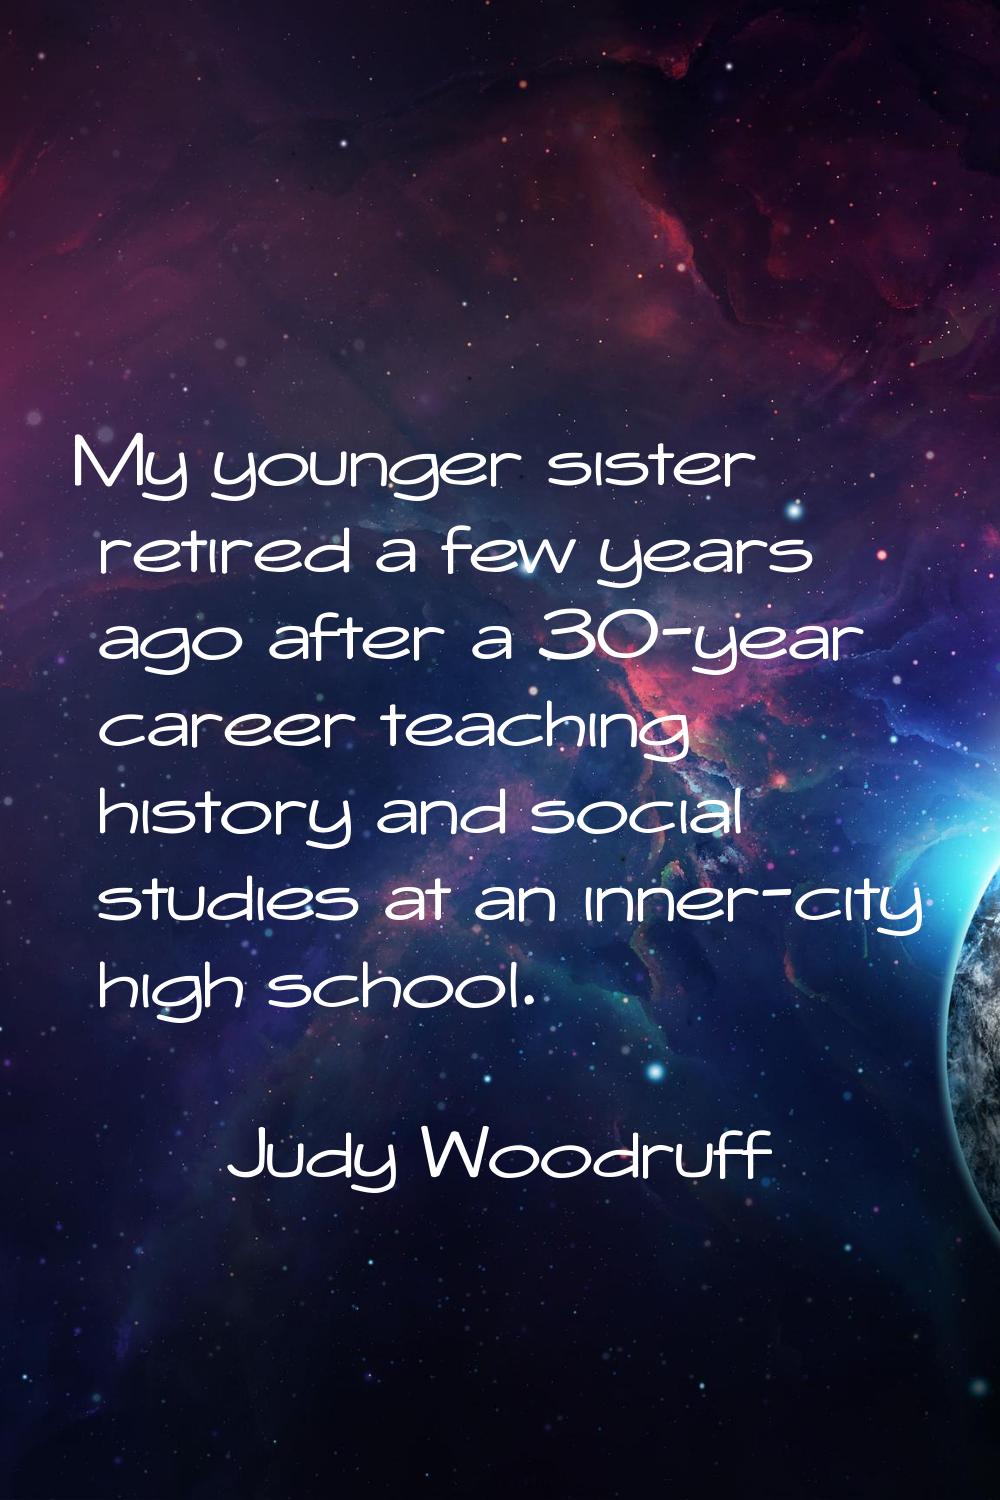 My younger sister retired a few years ago after a 30-year career teaching history and social studie